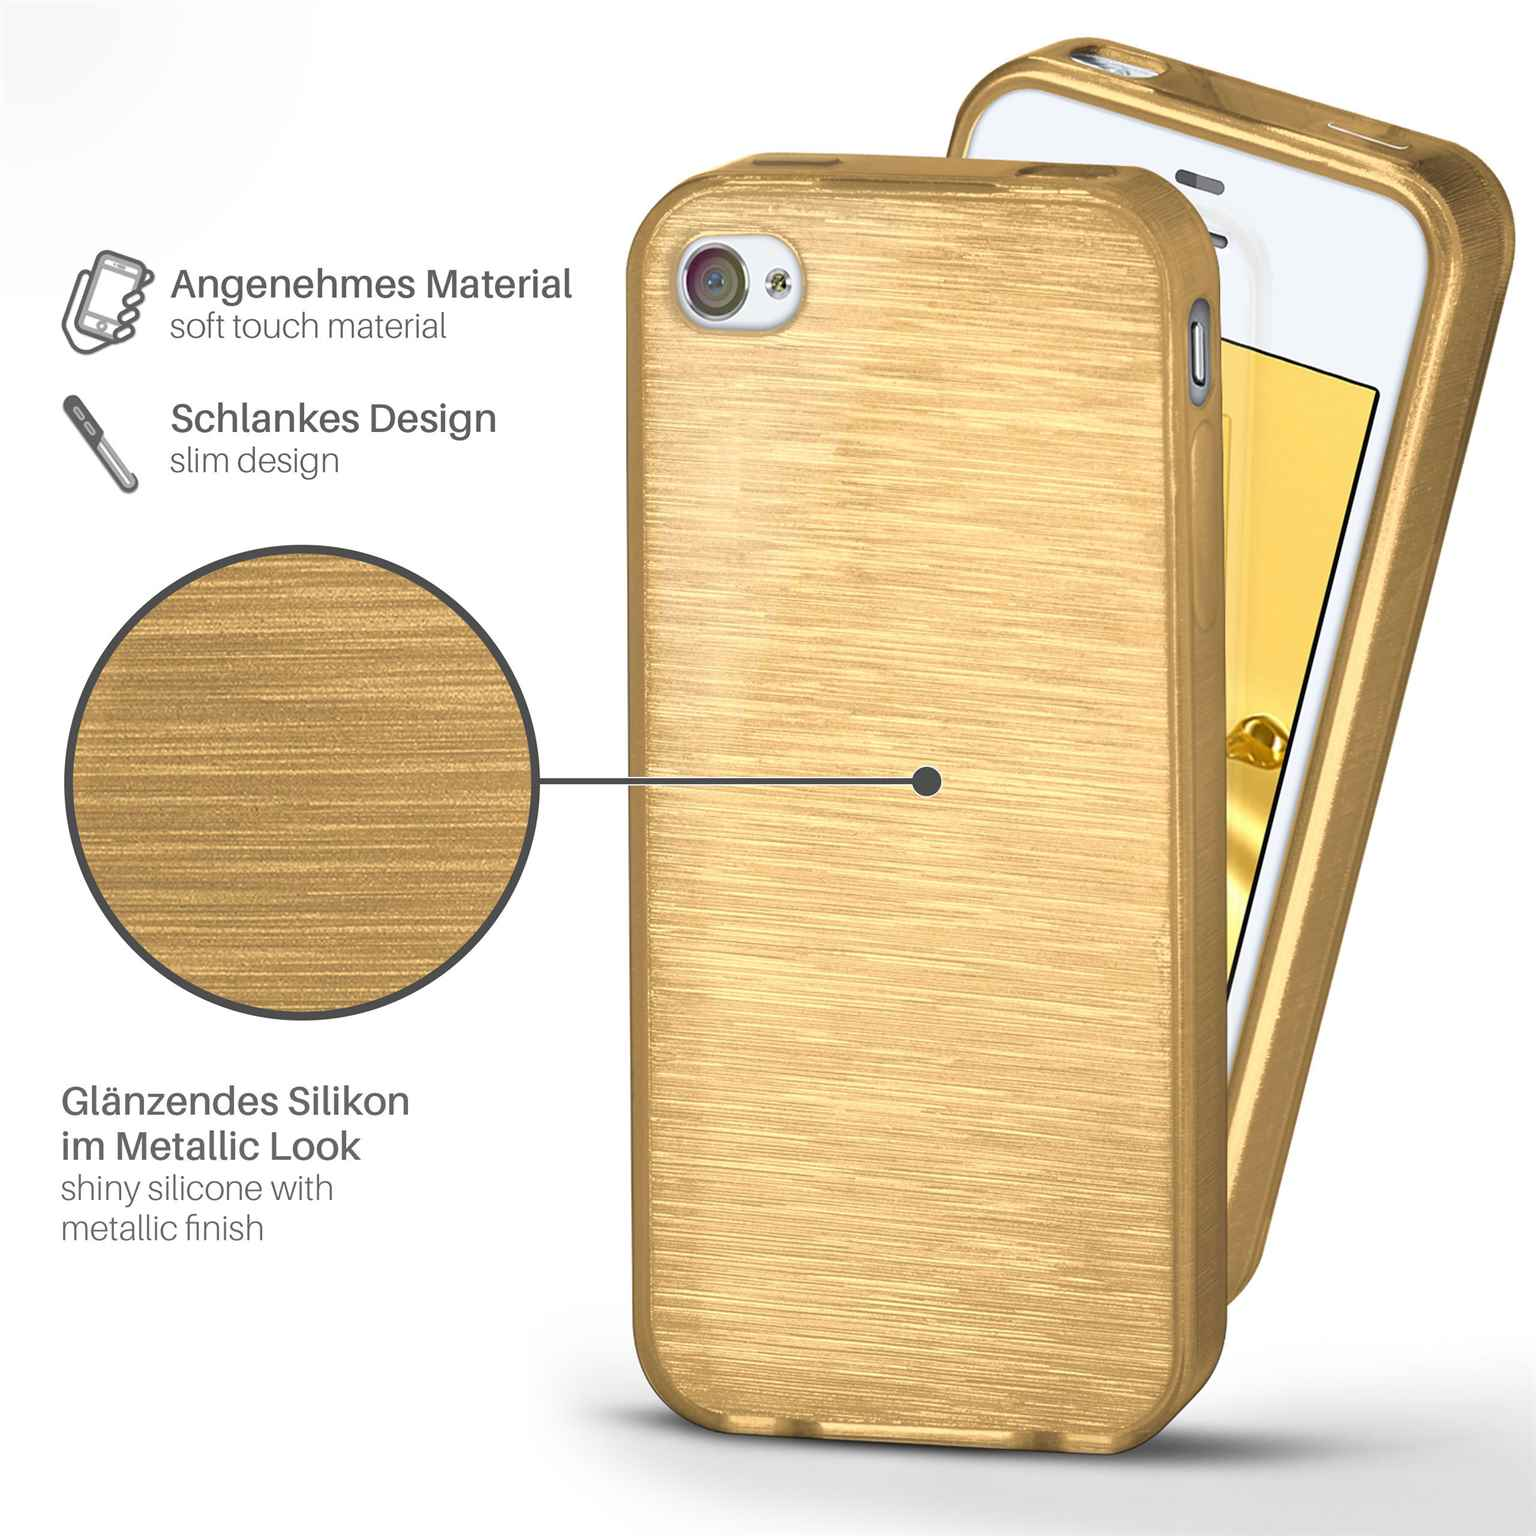 MOEX Brushed Case, iPhone Apple, Ivory-Gold 4S, Backcover